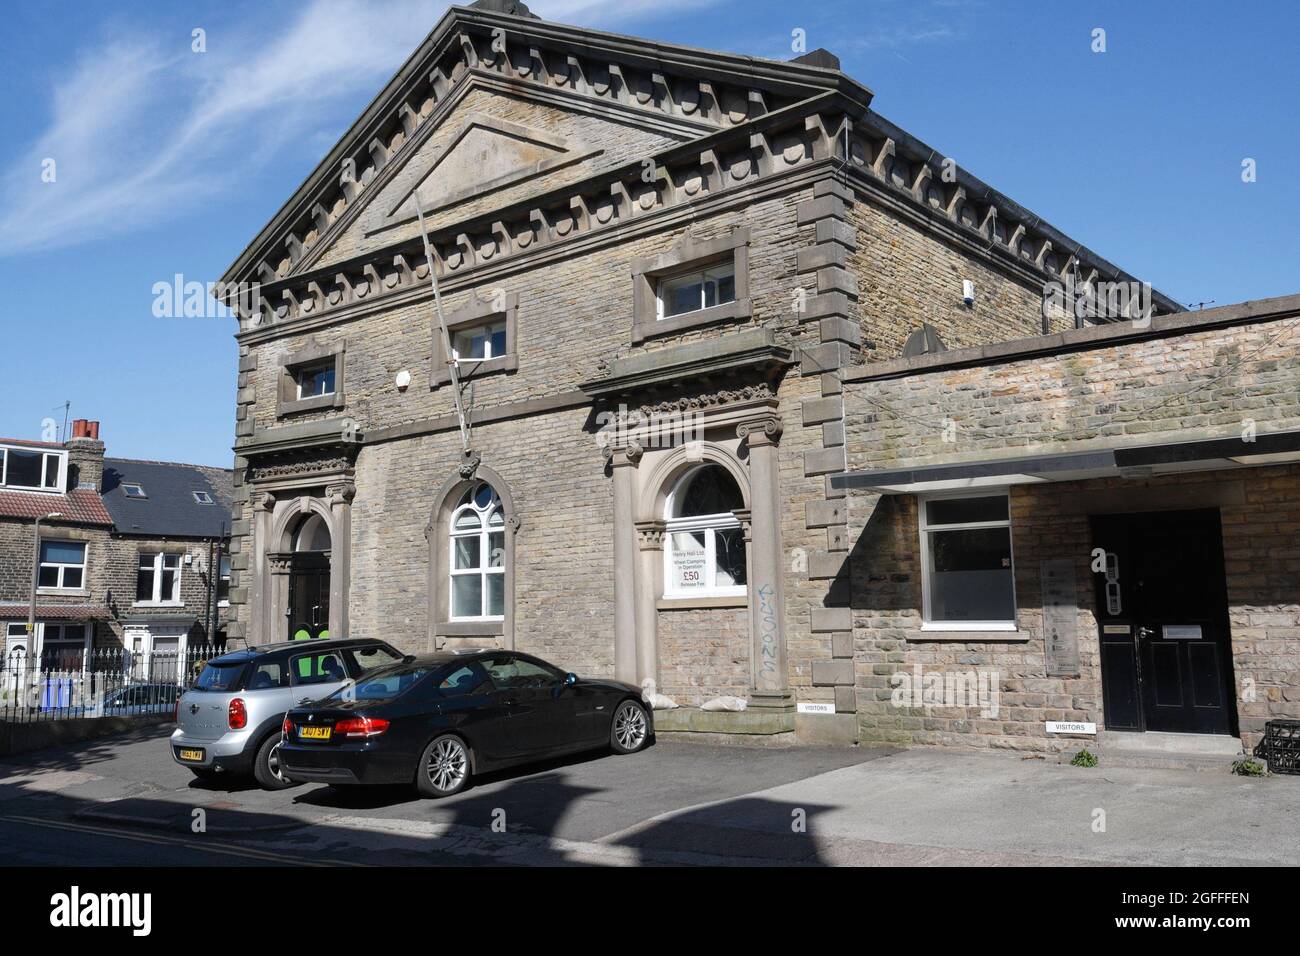 The former Cherry Tree chapel building, on Union Road Nether Edge, Sheffield england, Now a commercial property Stock Photo